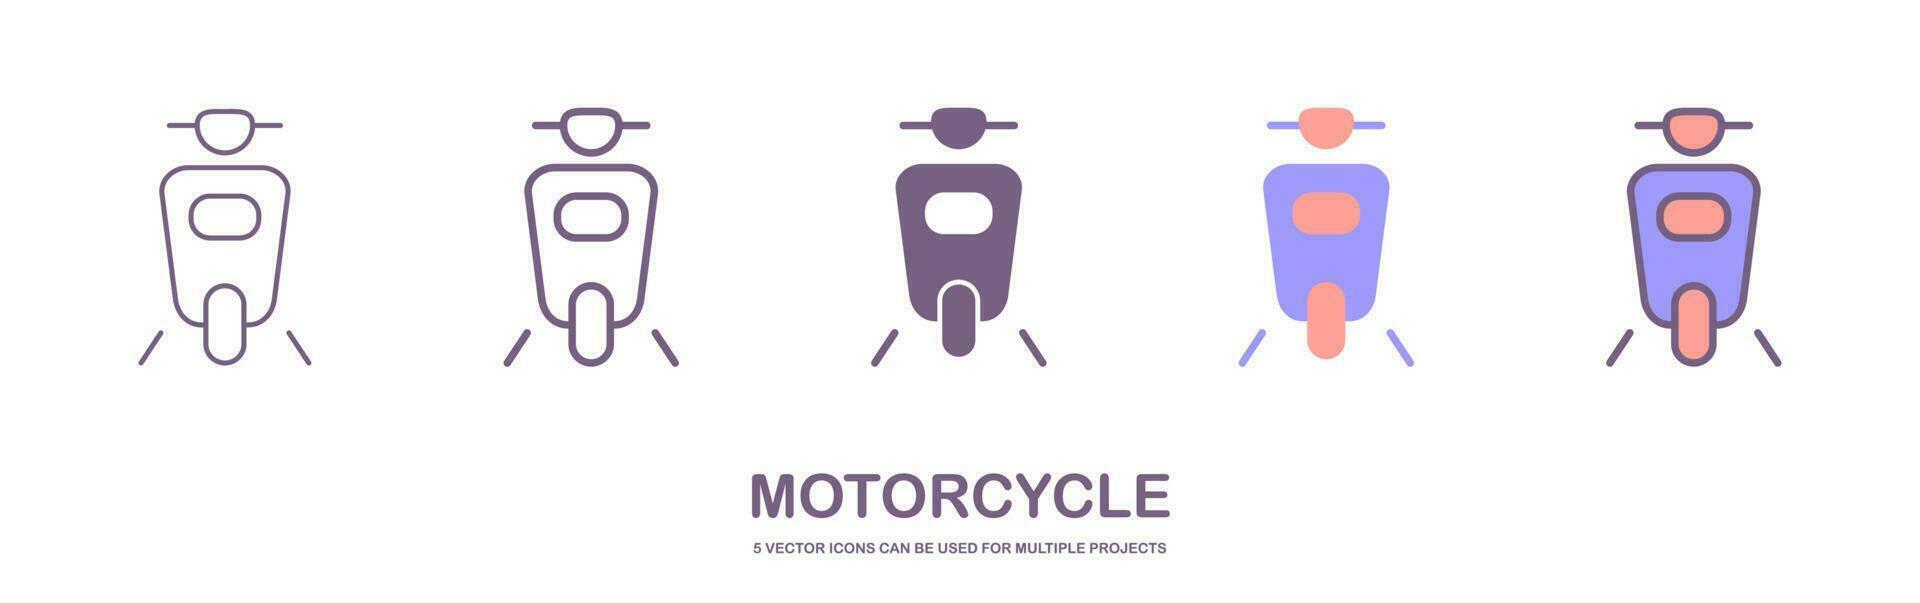 Big isolated Motorcycle vector colorful icons set, flat illustrations of various type motorcycles. isolated on white background